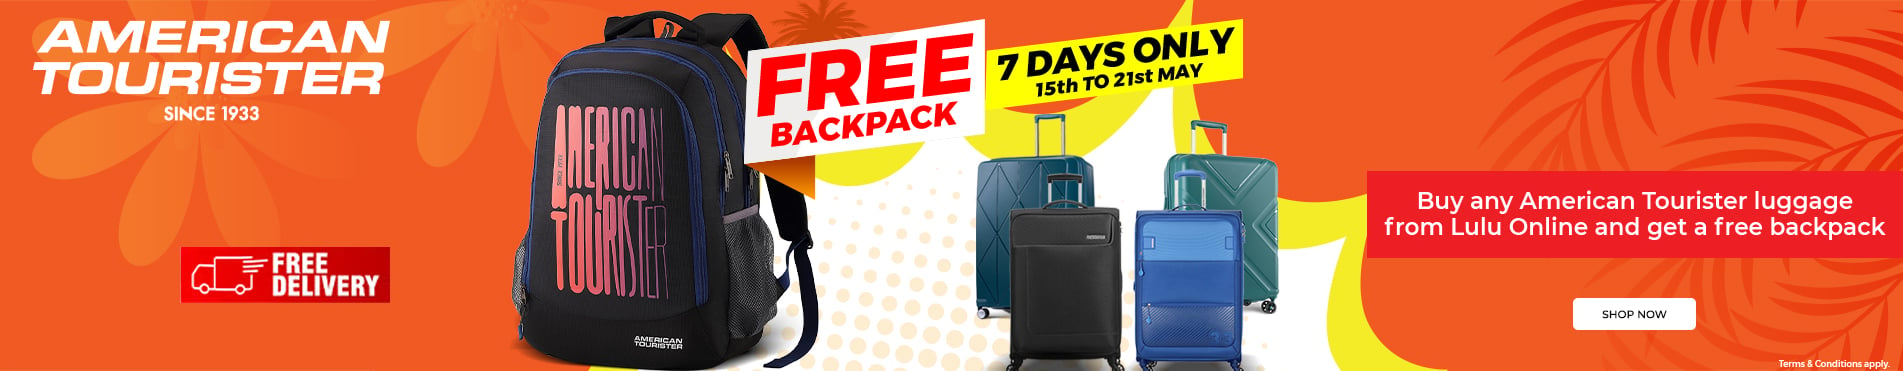 American tourister free backpack